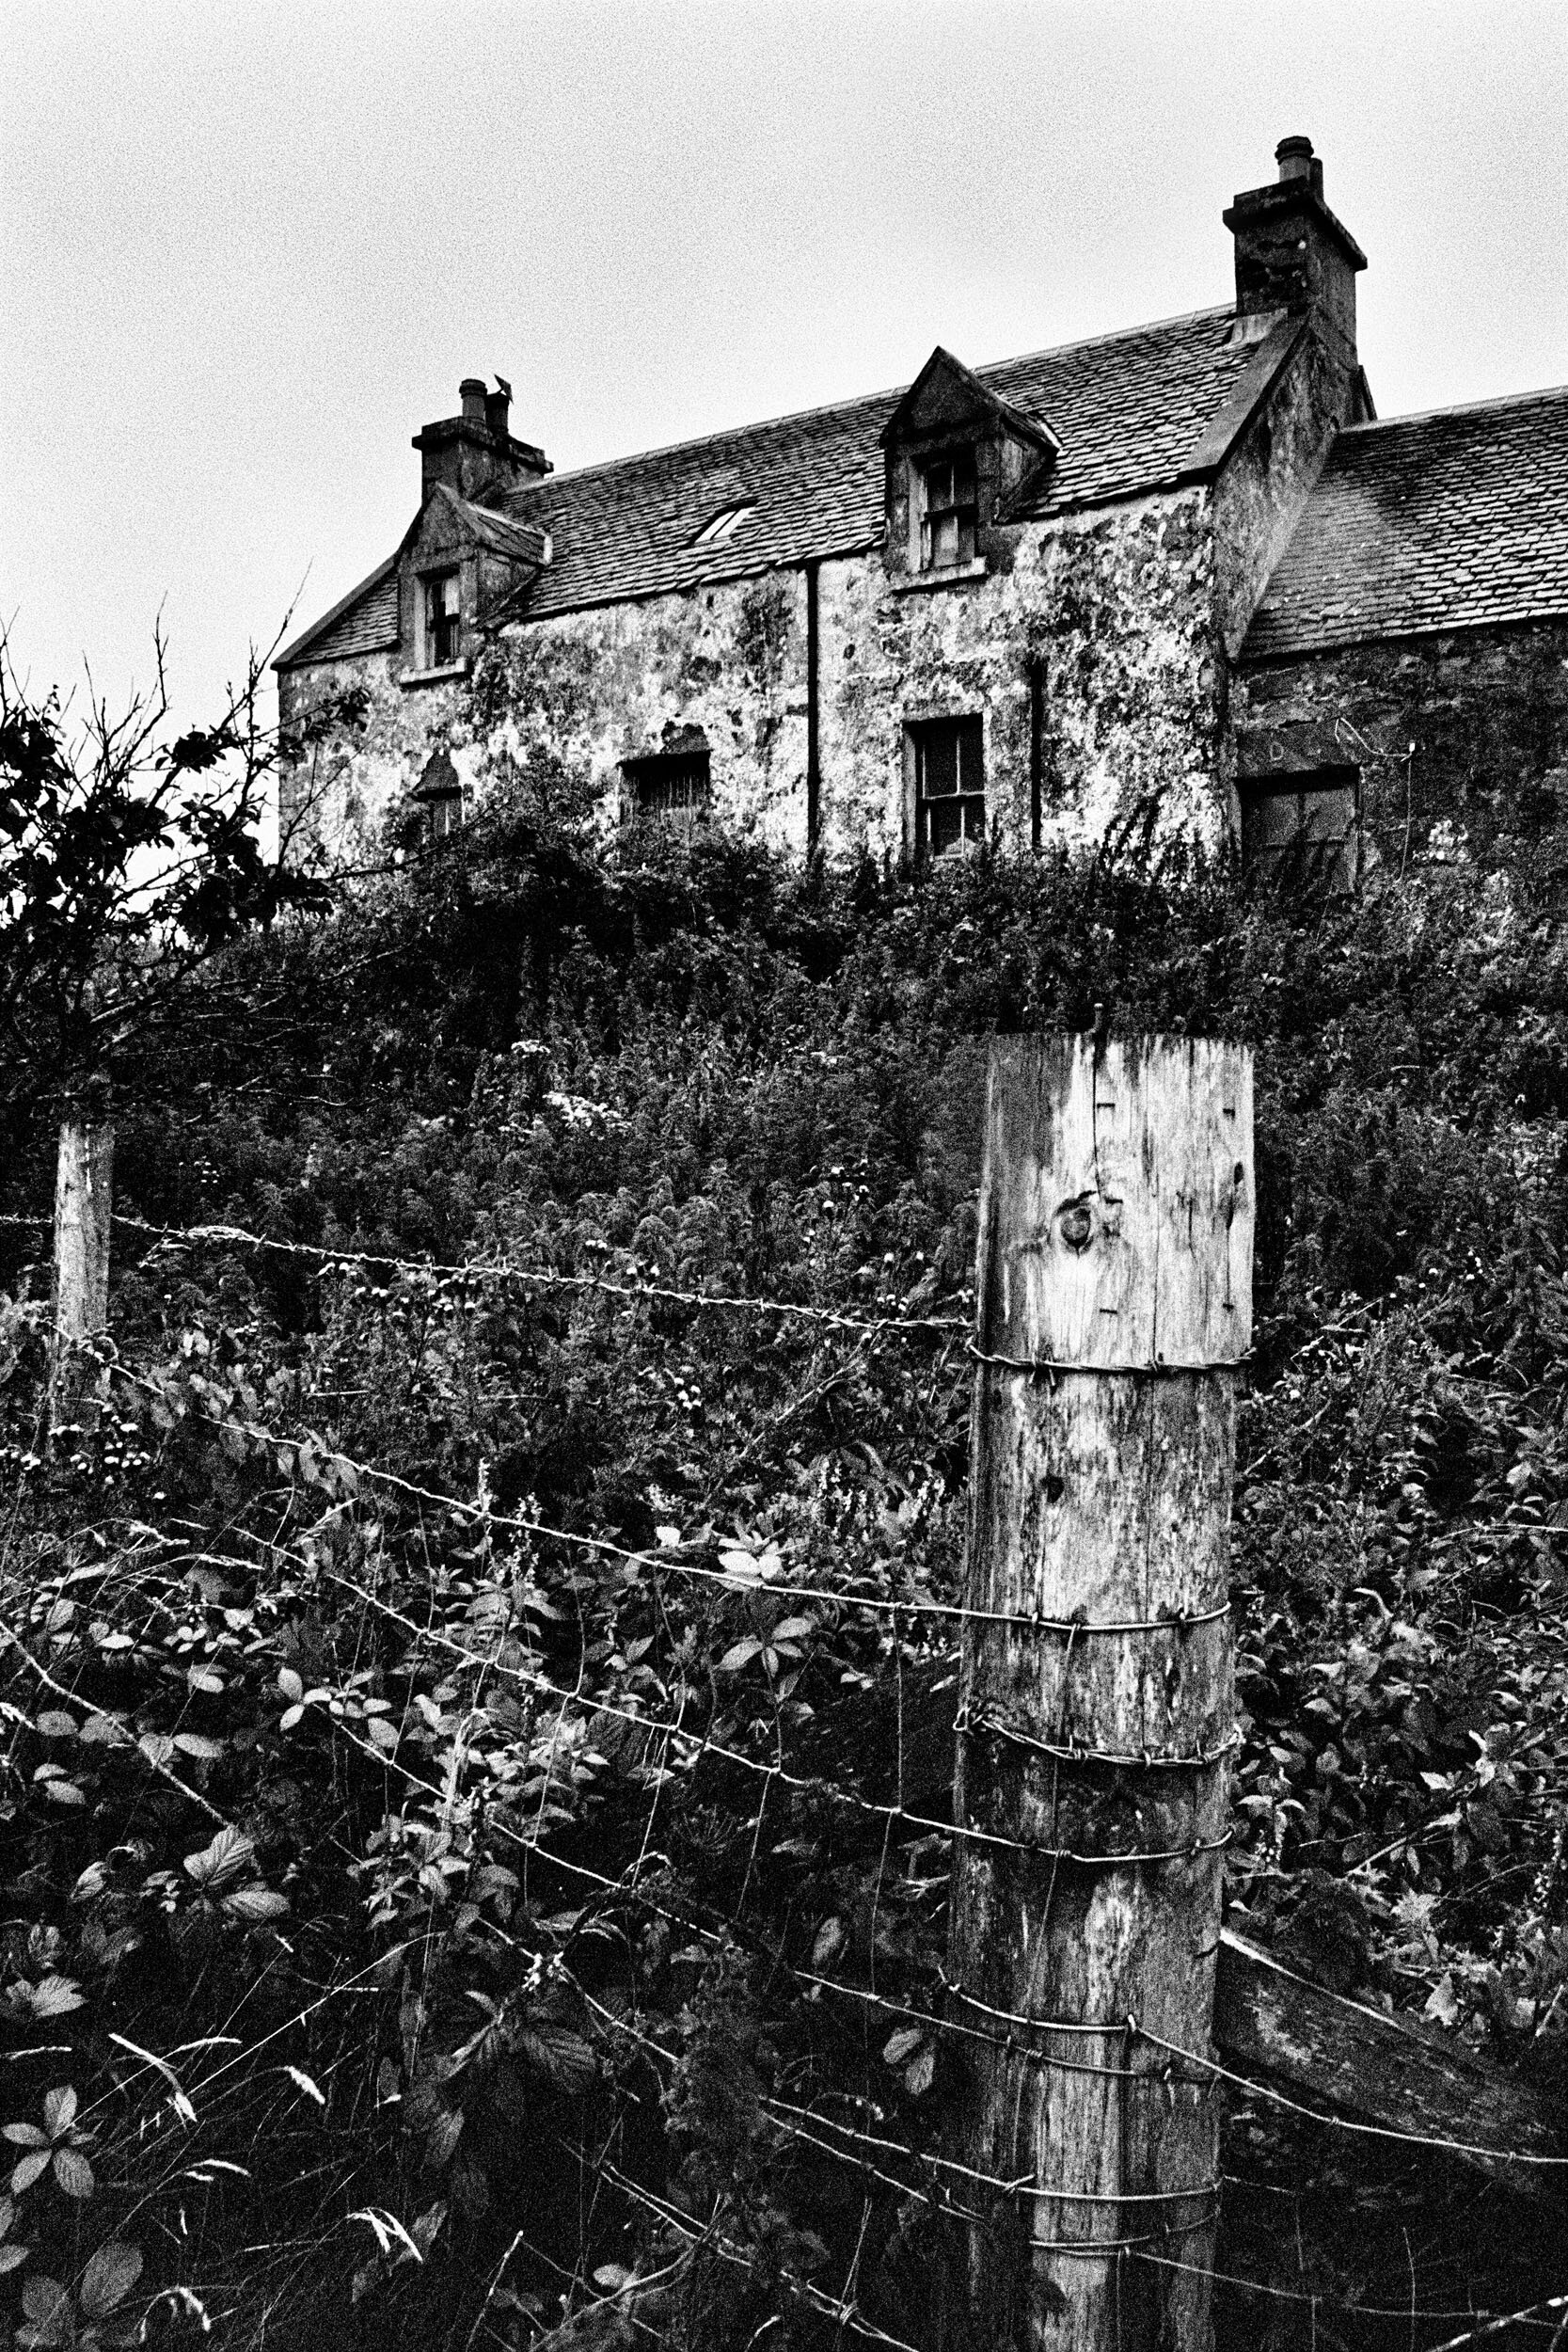  Derelict House at the Old Port, Lochmaddy, North Uist, 2018 